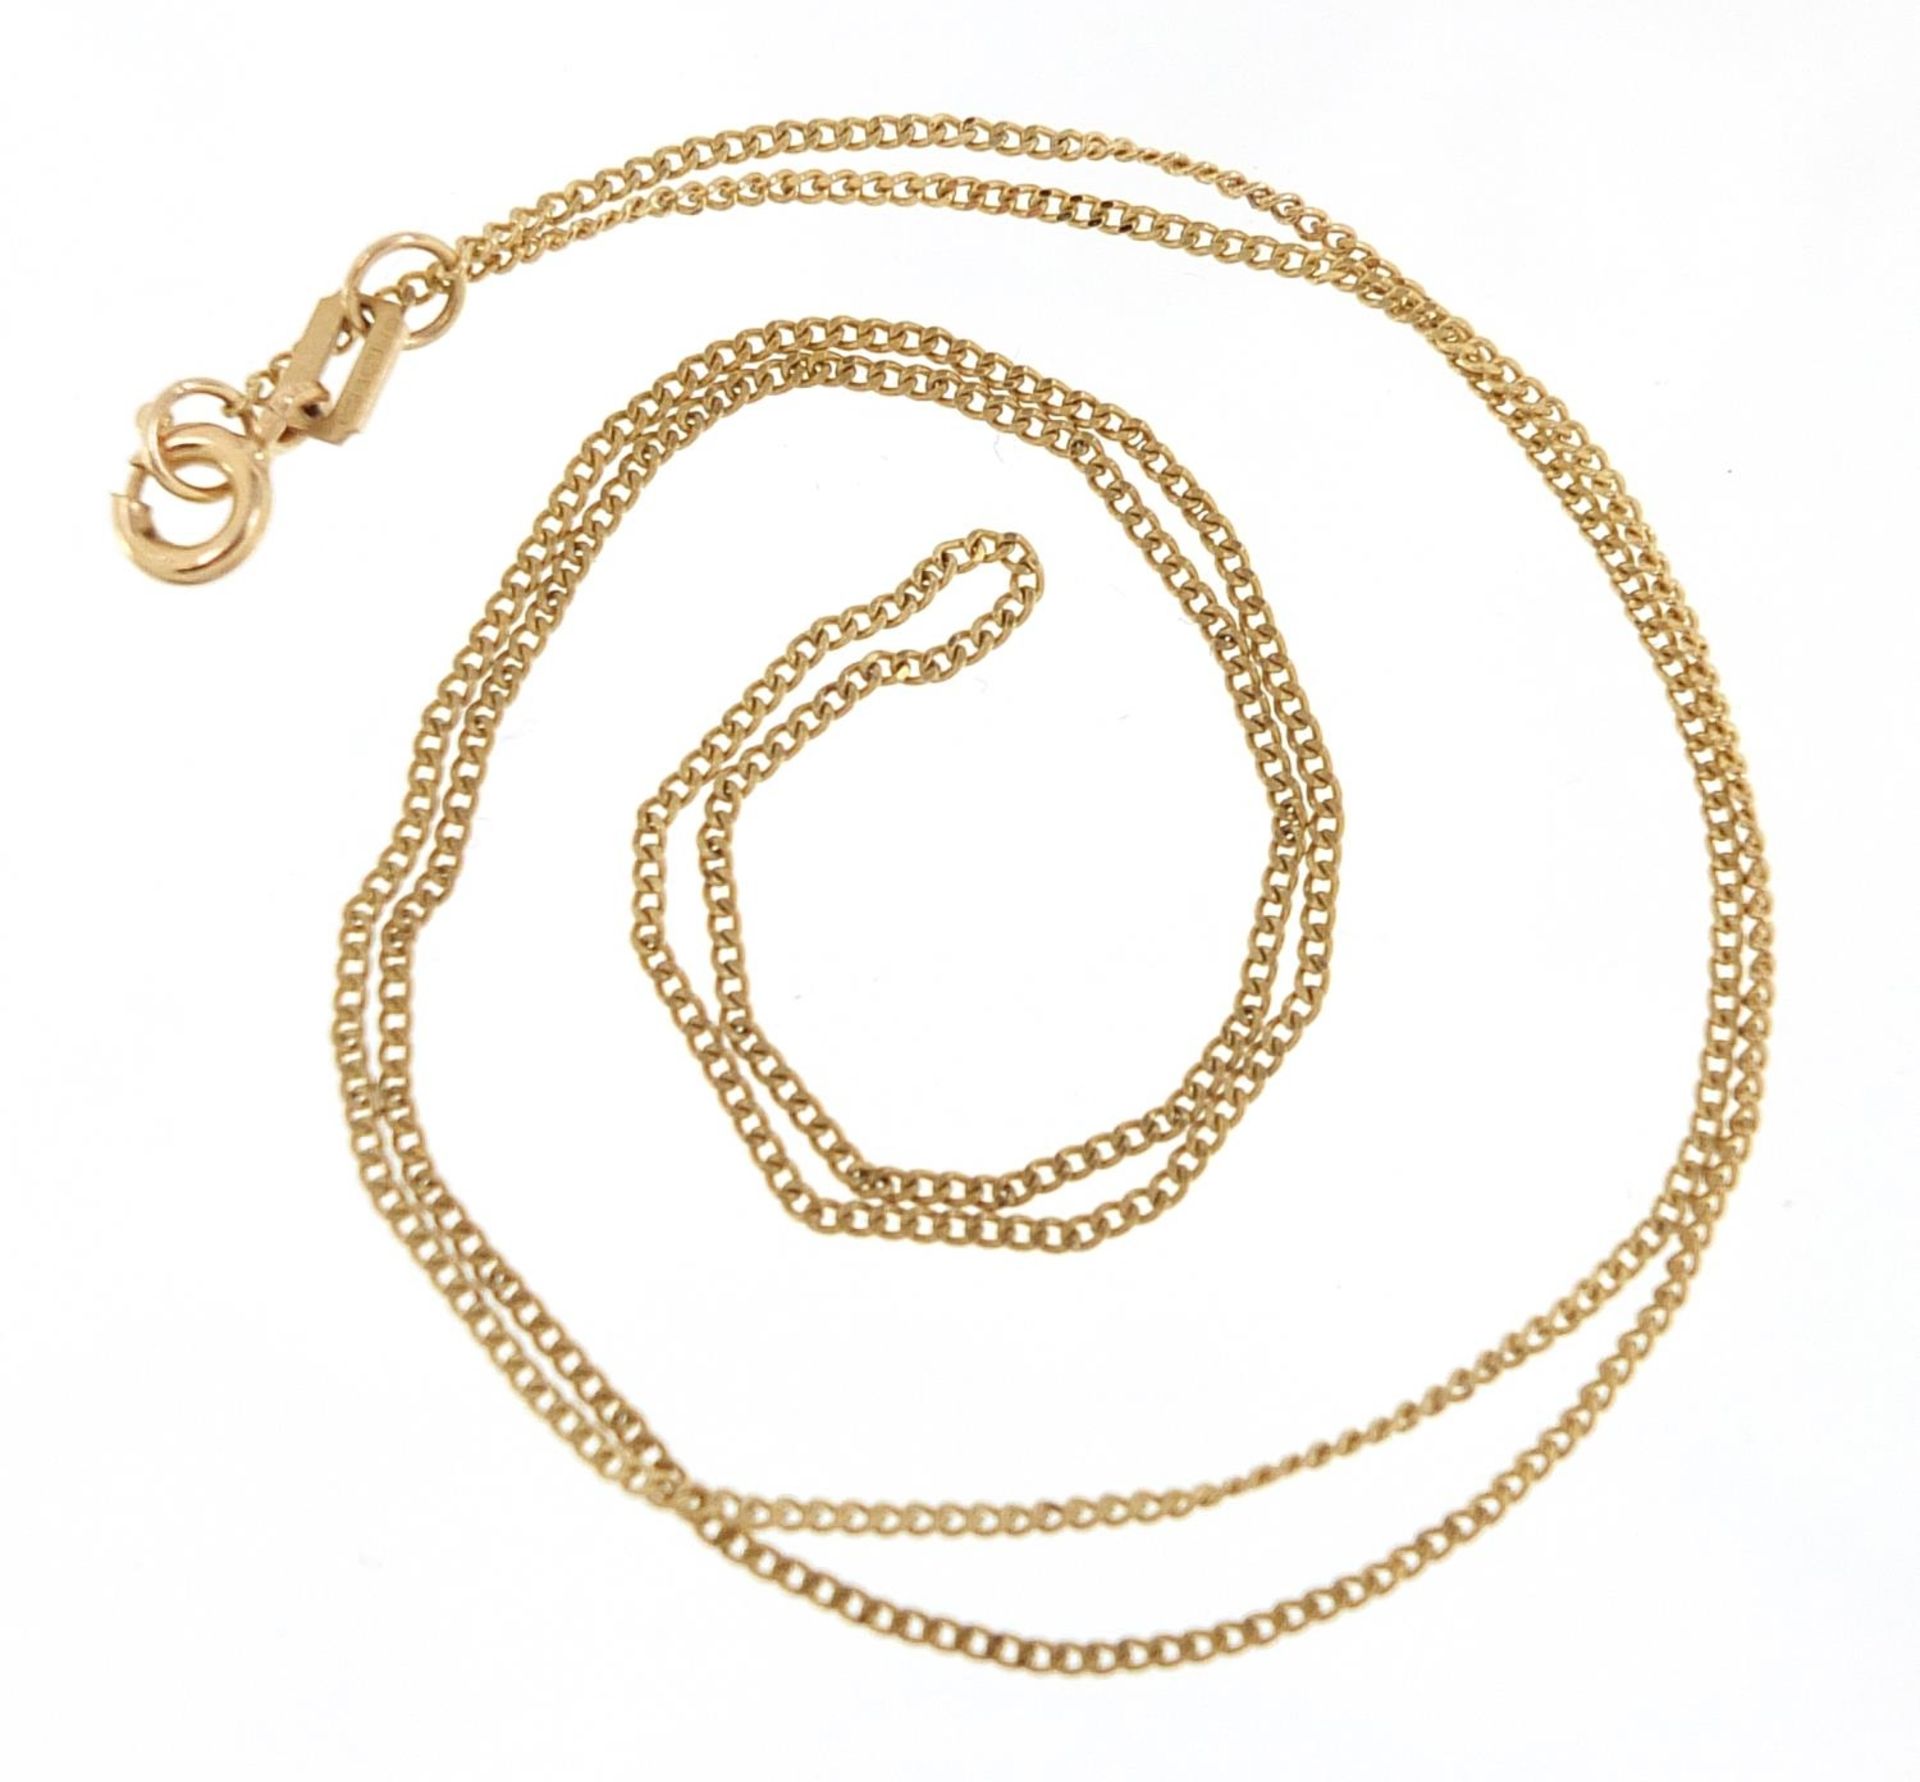 9ct gold curb link necklace, 46cm in length, 1.7g - Image 2 of 3